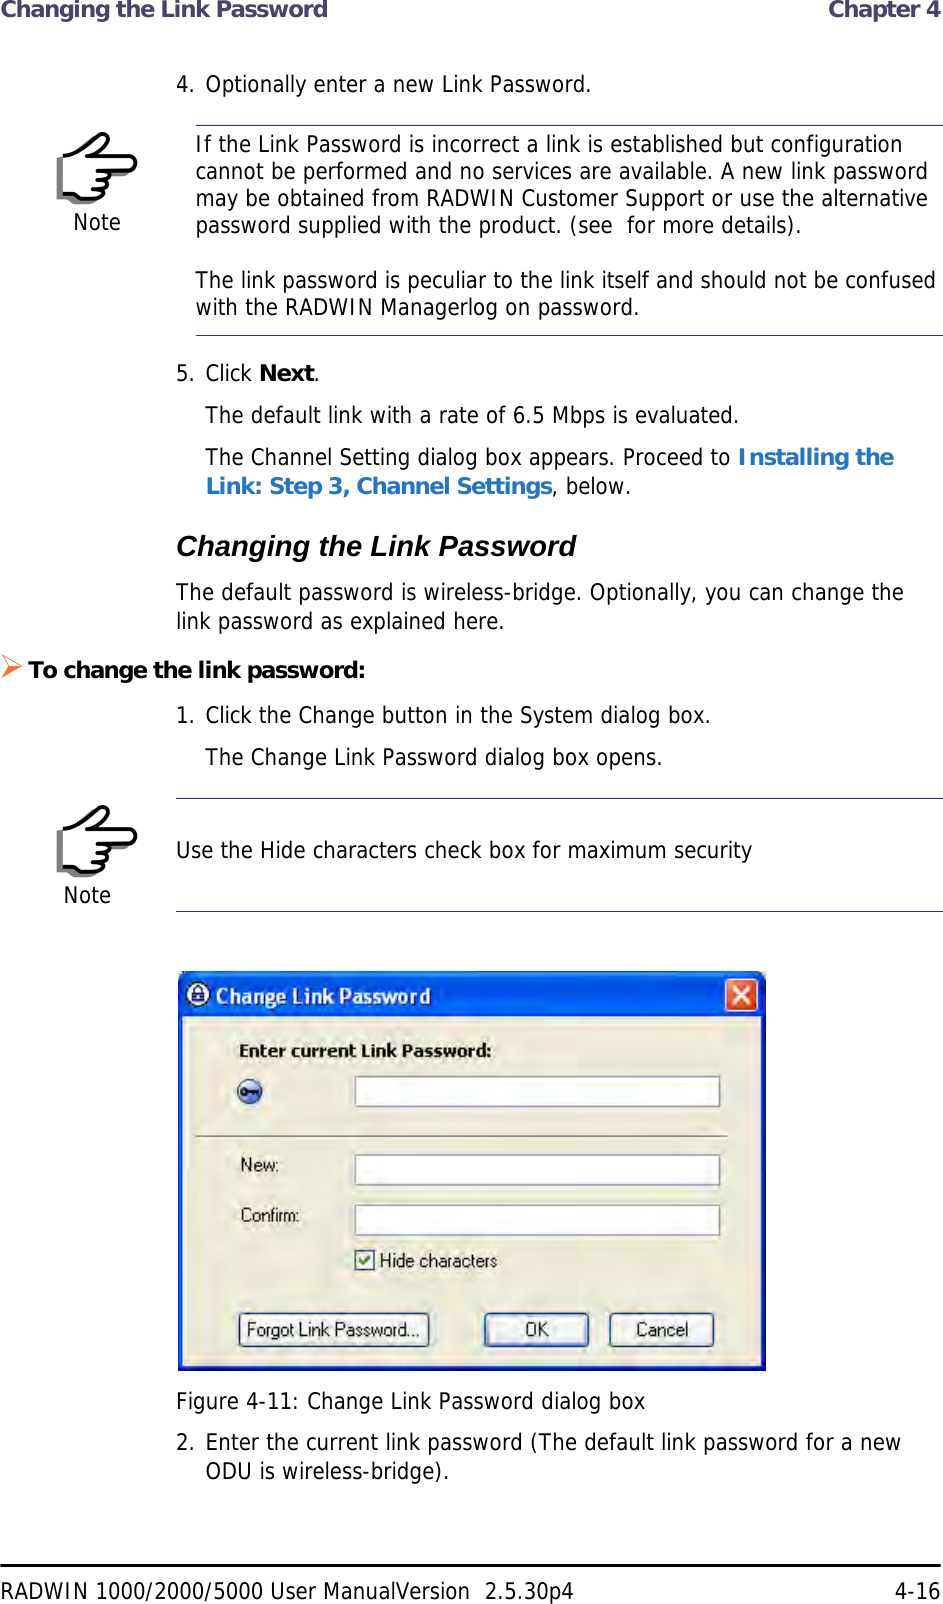 Changing the Link Password  Chapter 4RADWIN 1000/2000/5000 User ManualVersion  2.5.30p4 4-164. Optionally enter a new Link Password. 5. Click Next.The default link with a rate of 6.5 Mbps is evaluated.The Channel Setting dialog box appears. Proceed to Installing the Link: Step 3, Channel Settings, below.Changing the Link PasswordThe default password is wireless-bridge. Optionally, you can change the link password as explained here.To change the link password:1. Click the Change button in the System dialog box.The Change Link Password dialog box opens.Figure 4-11: Change Link Password dialog box2. Enter the current link password (The default link password for a new ODU is wireless-bridge).NoteIf the Link Password is incorrect a link is established but configuration cannot be performed and no services are available. A new link password may be obtained from RADWIN Customer Support or use the alternative password supplied with the product. (see  for more details).The link password is peculiar to the link itself and should not be confused with the RADWIN Managerlog on password.NoteUse the Hide characters check box for maximum security